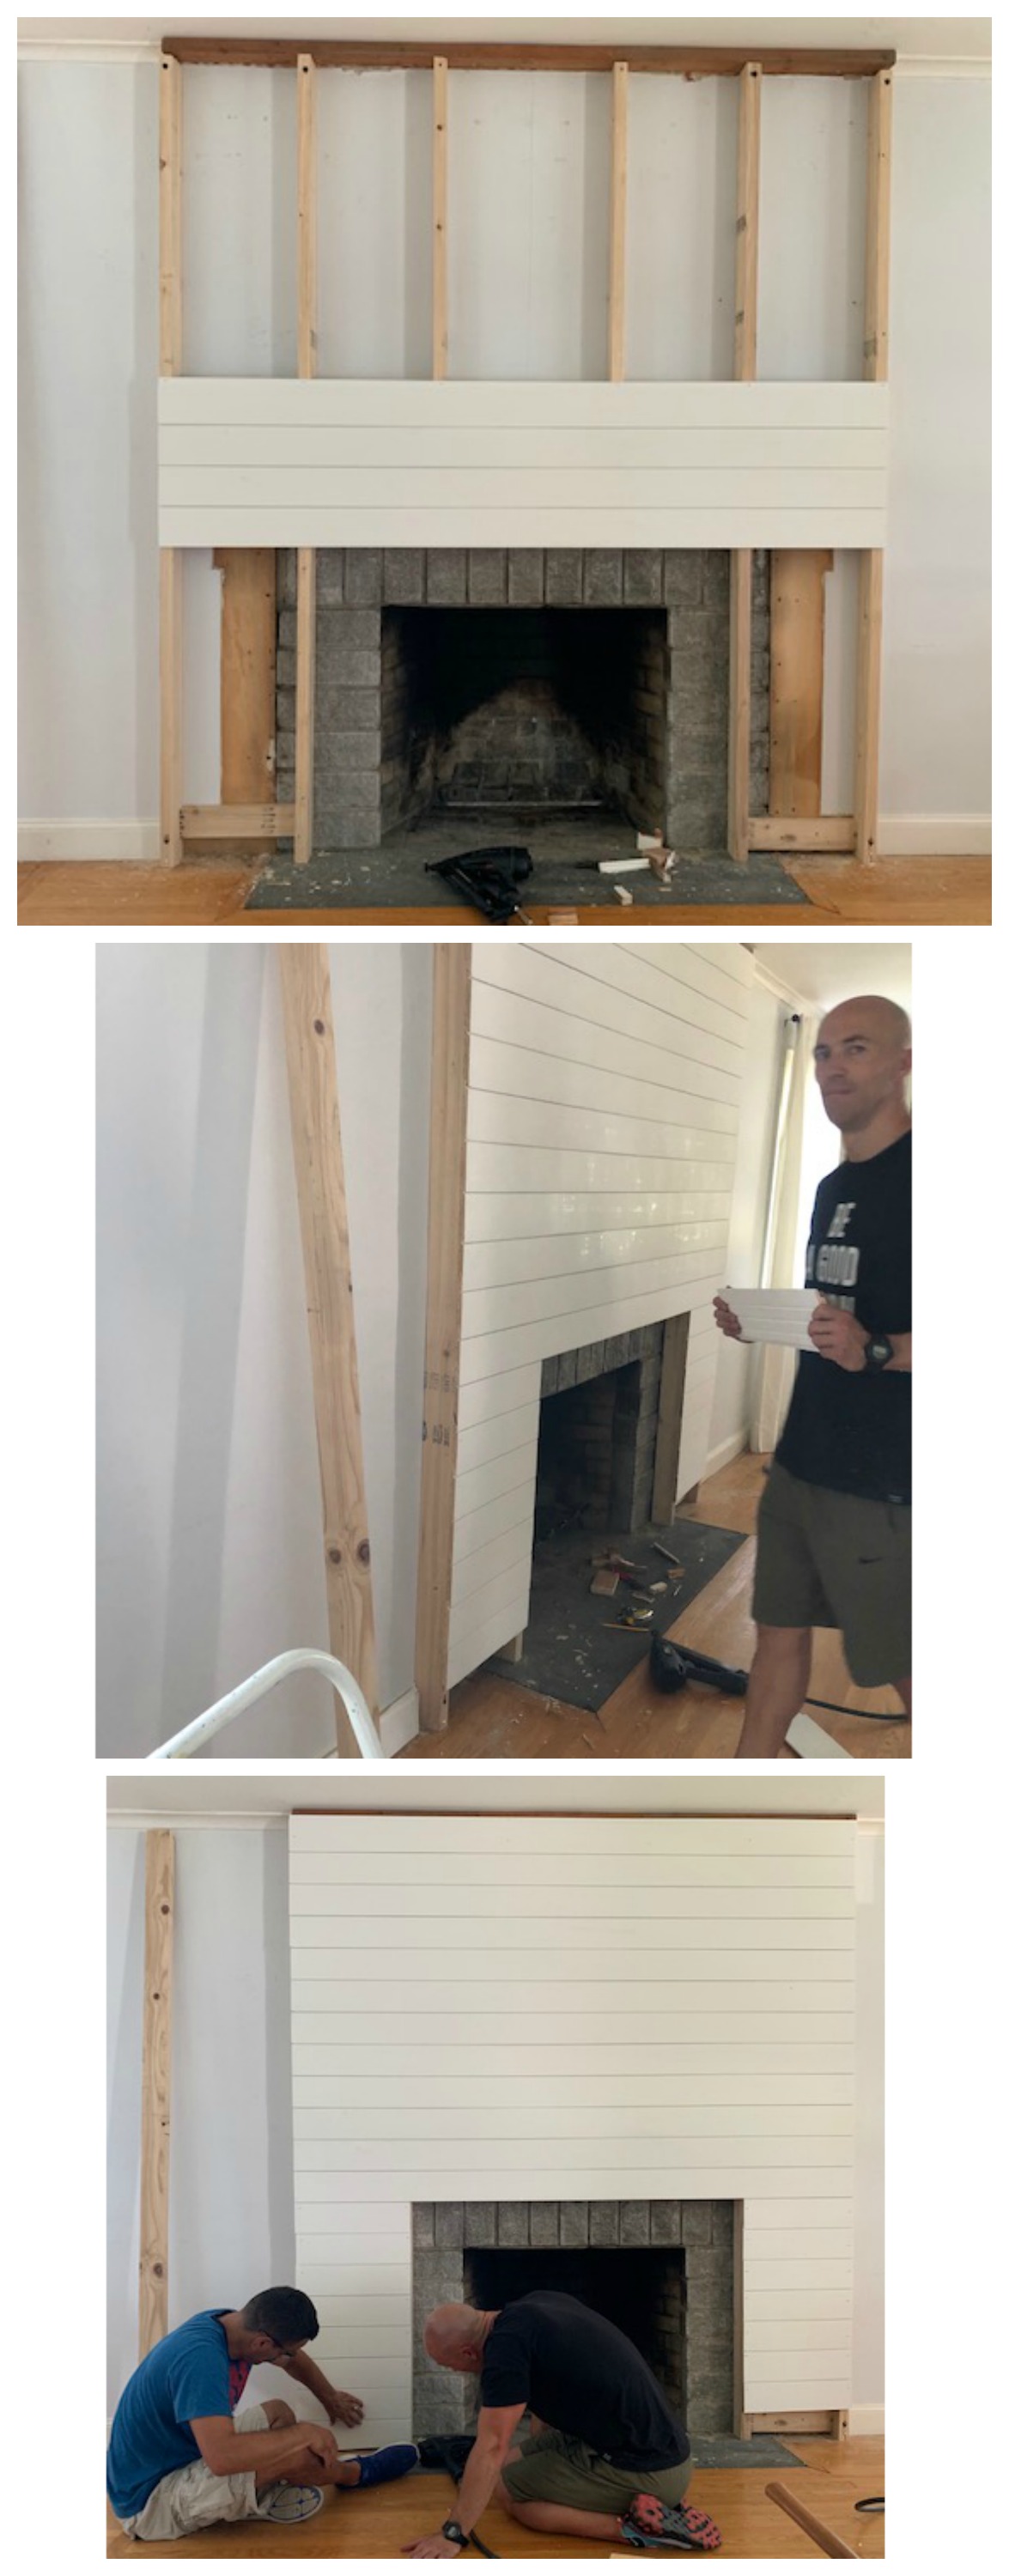 Brick Fireplace with White Mantle Inspirational Shiplap Fireplace and Diy Mantle Ditched the Old